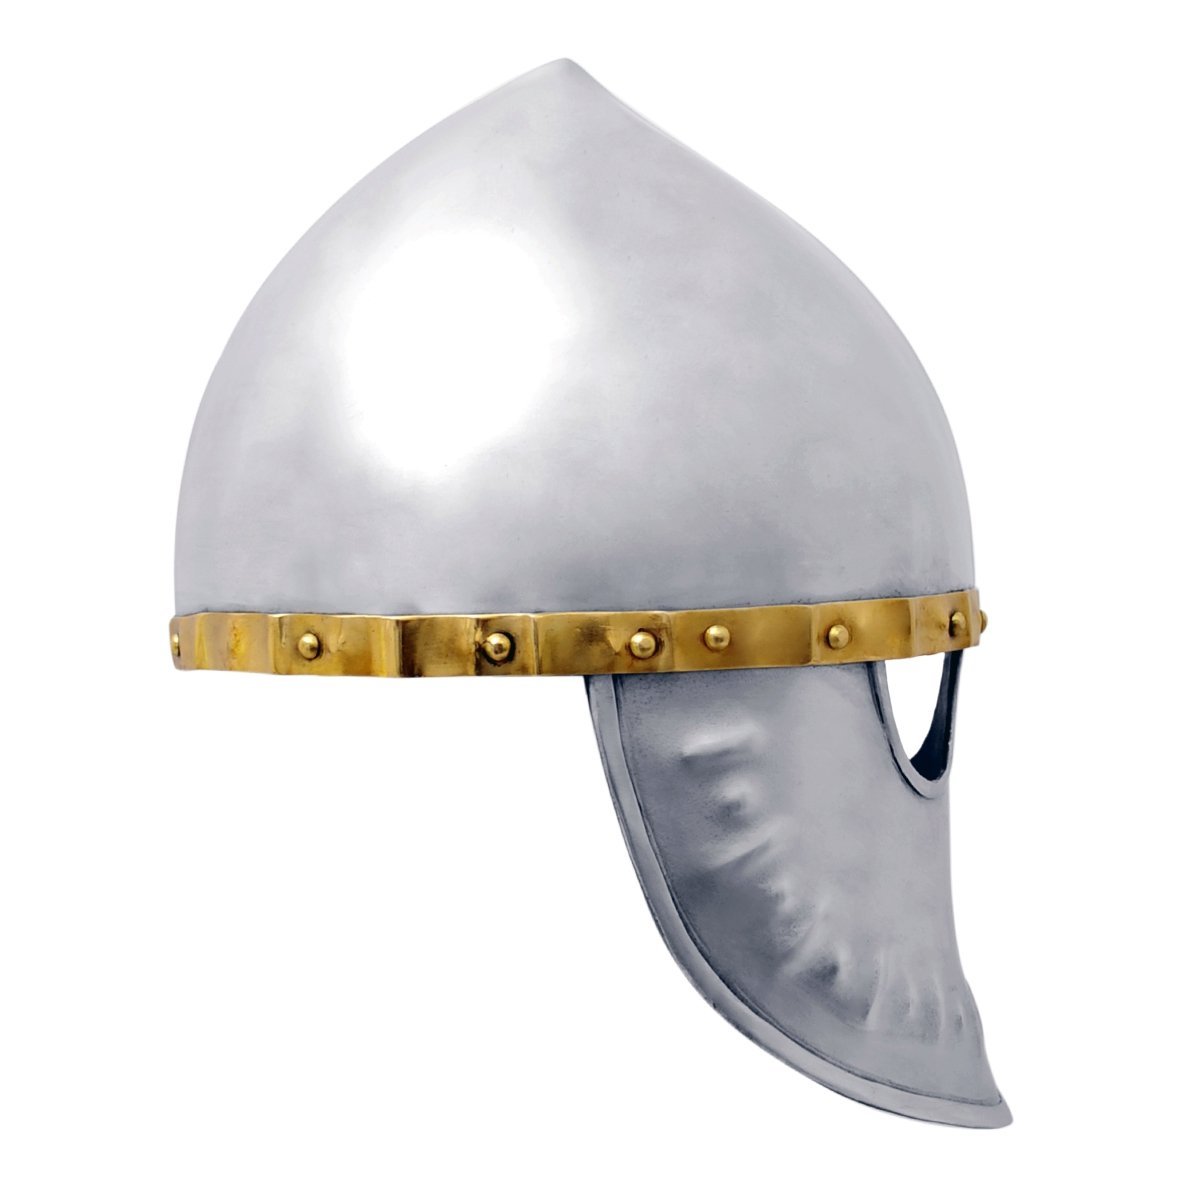 Italo Norman helmet with Face Plate C.1170, Size M